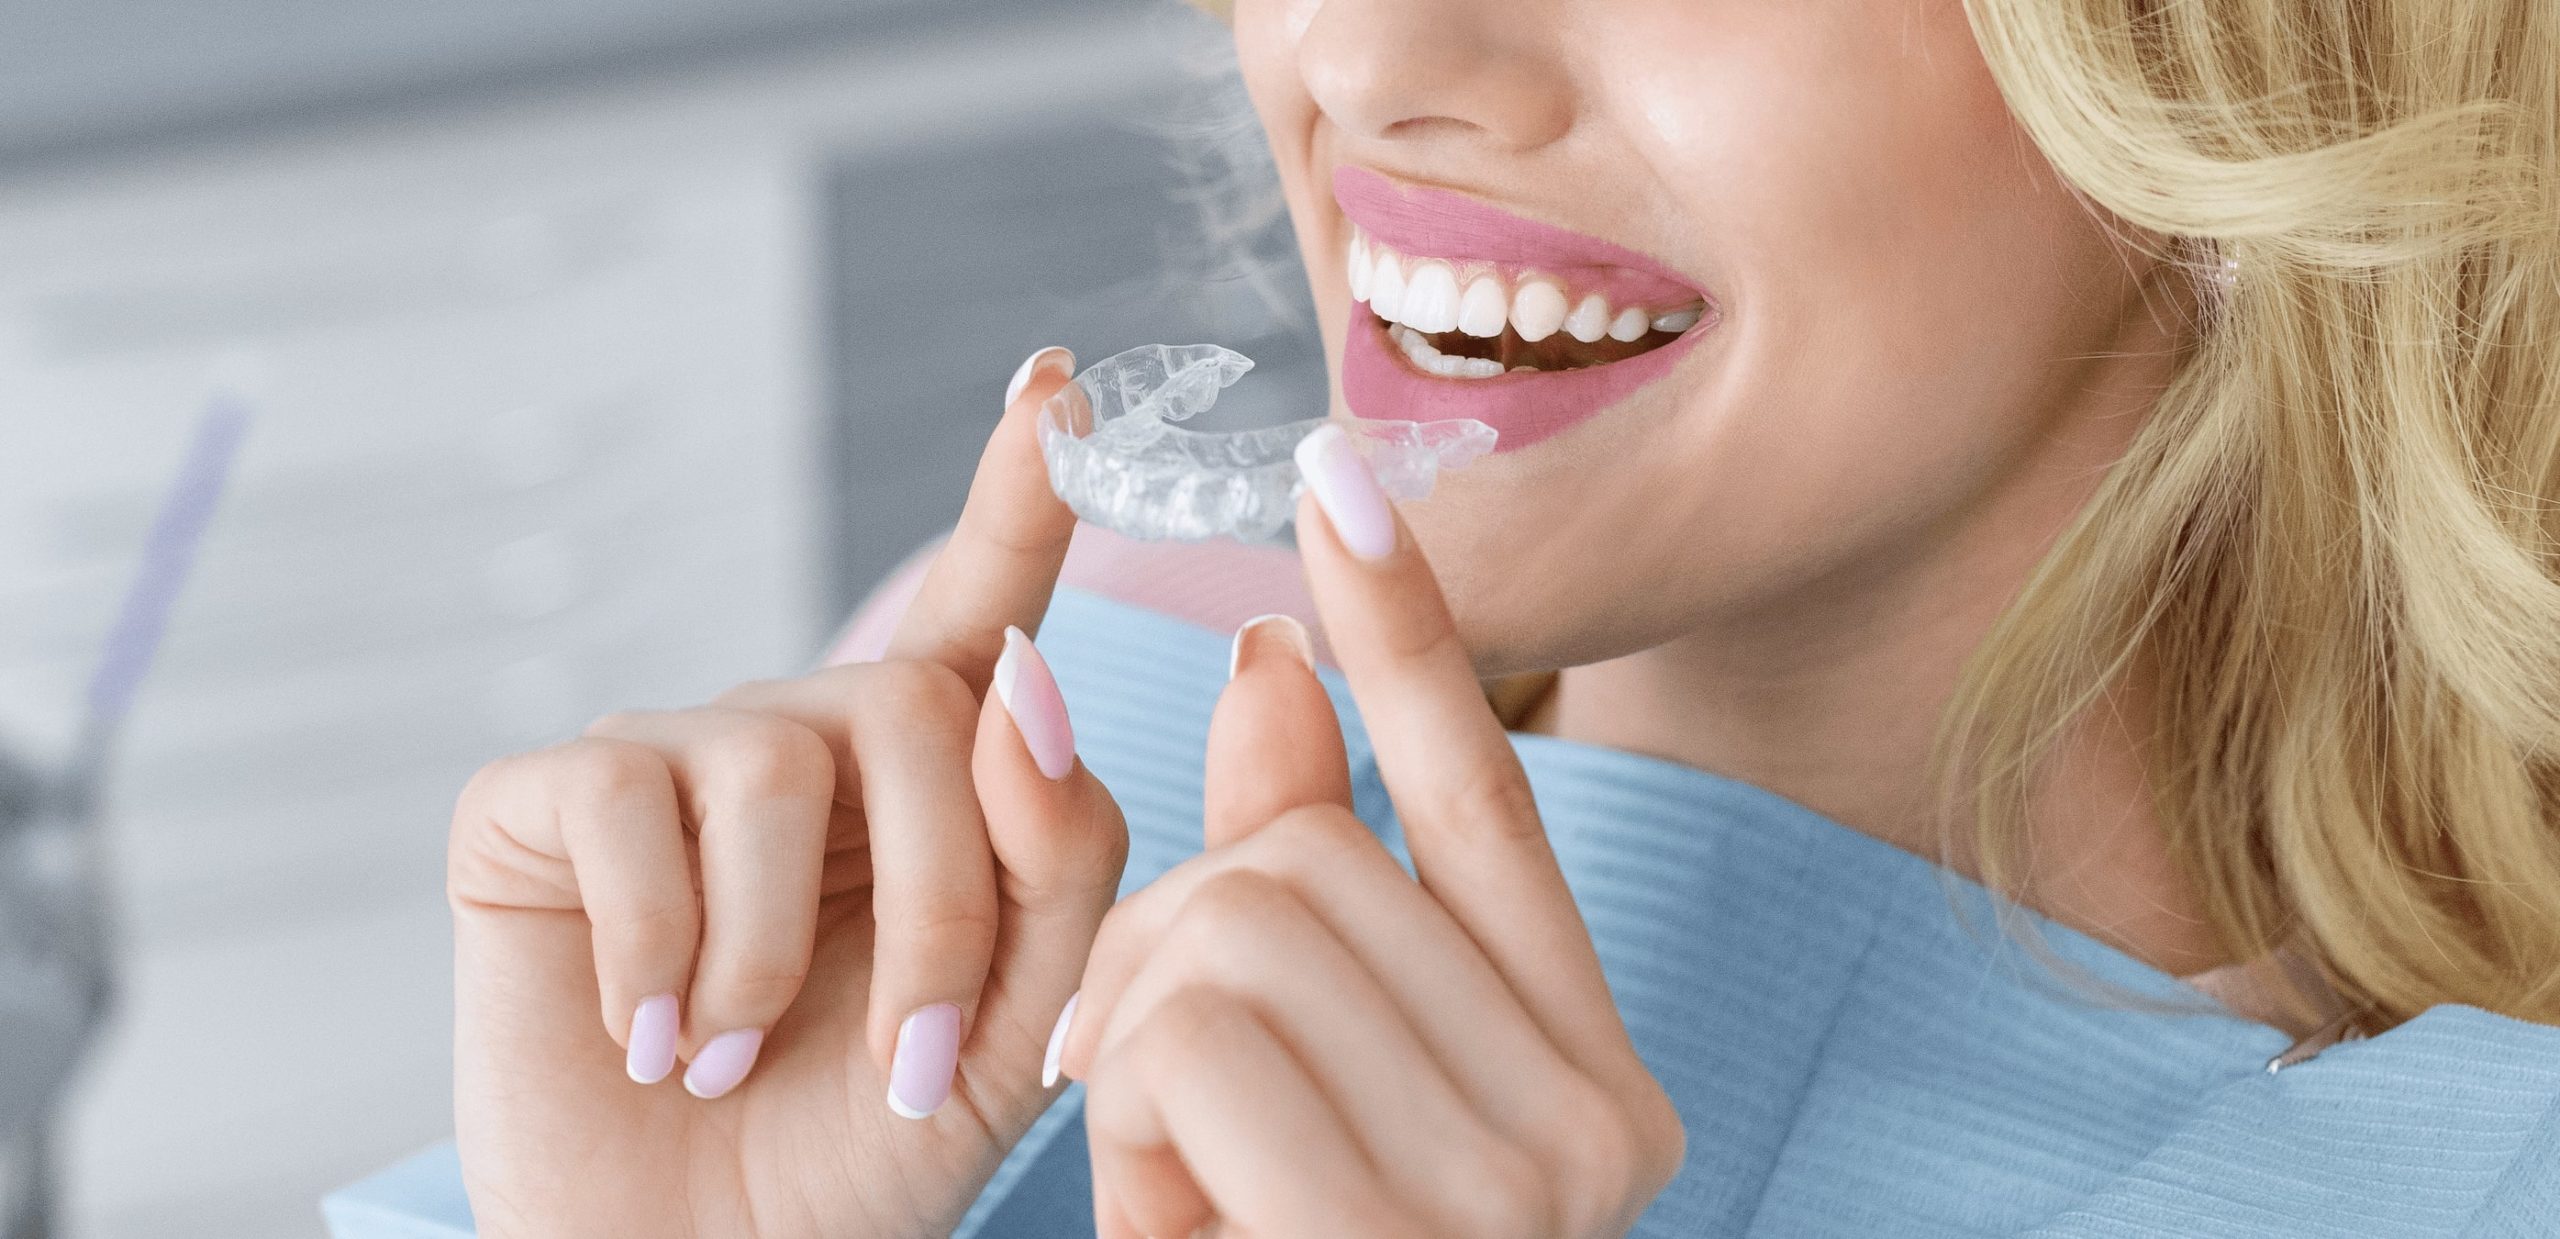 How to Look After Your Invisalign Aligners